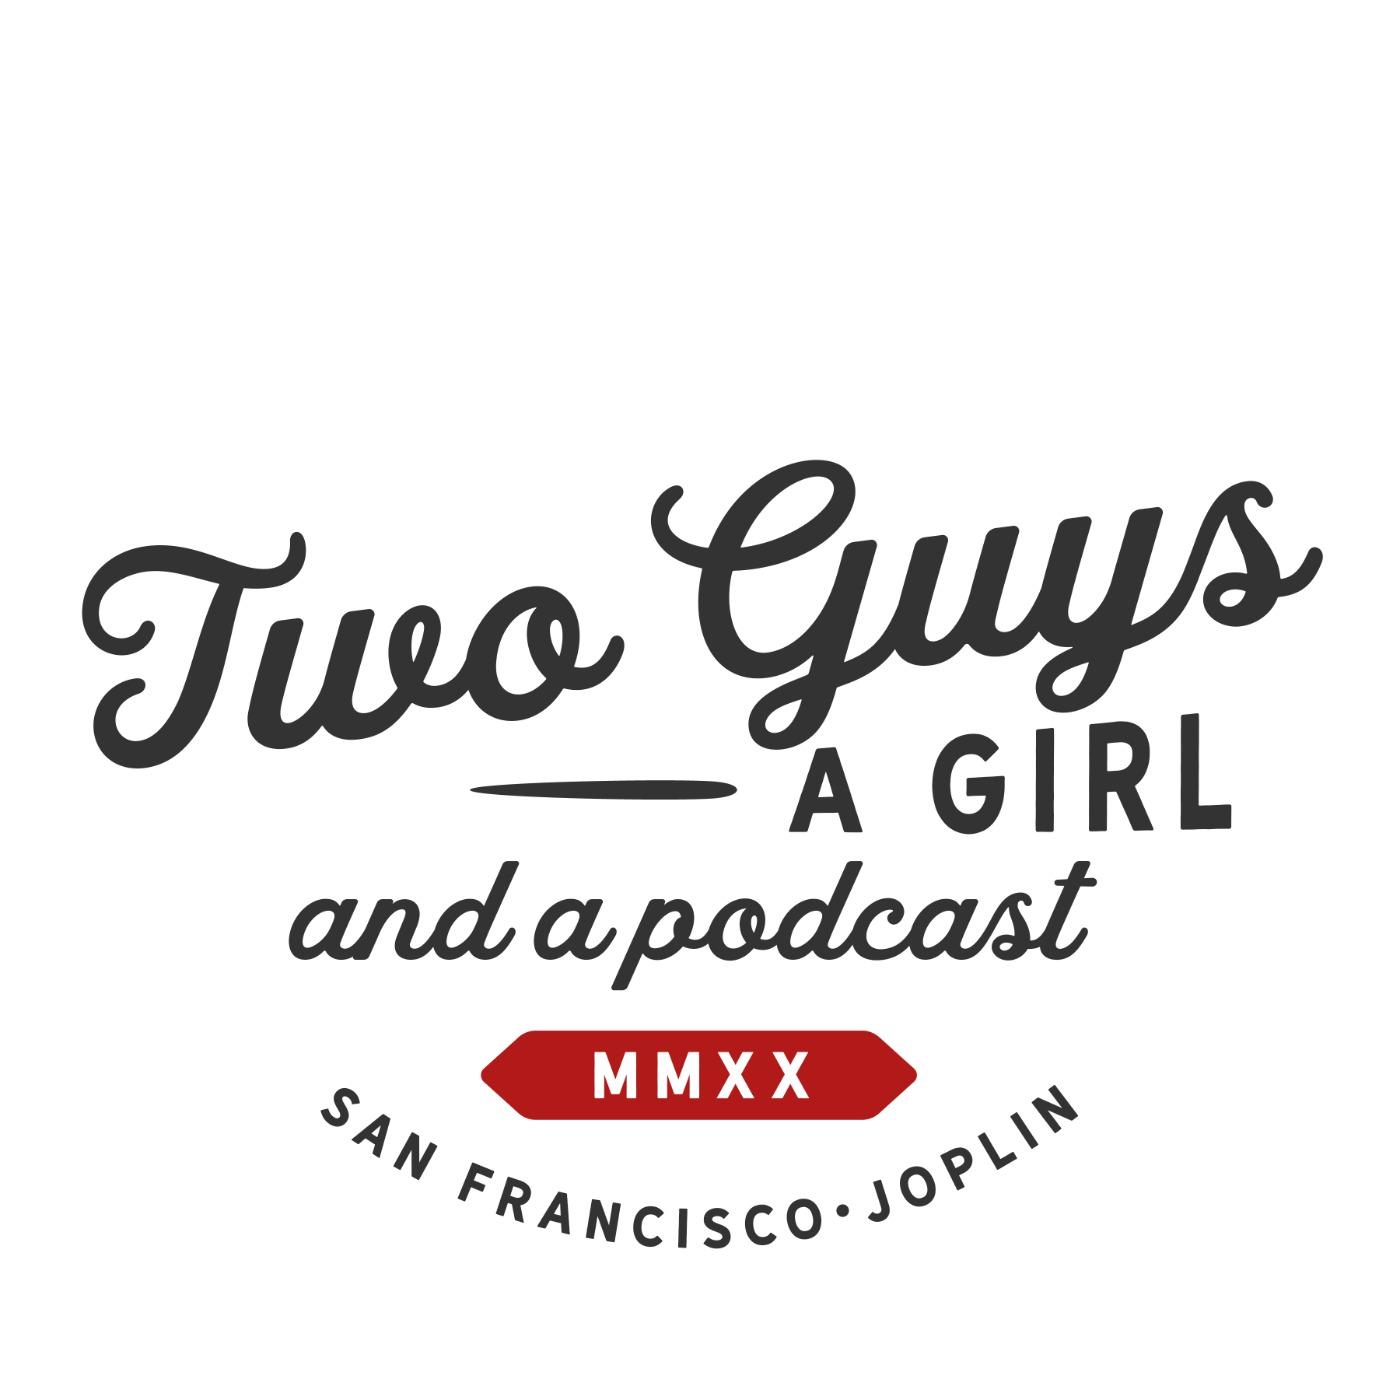 Two Guys, A Girl and a Podcast